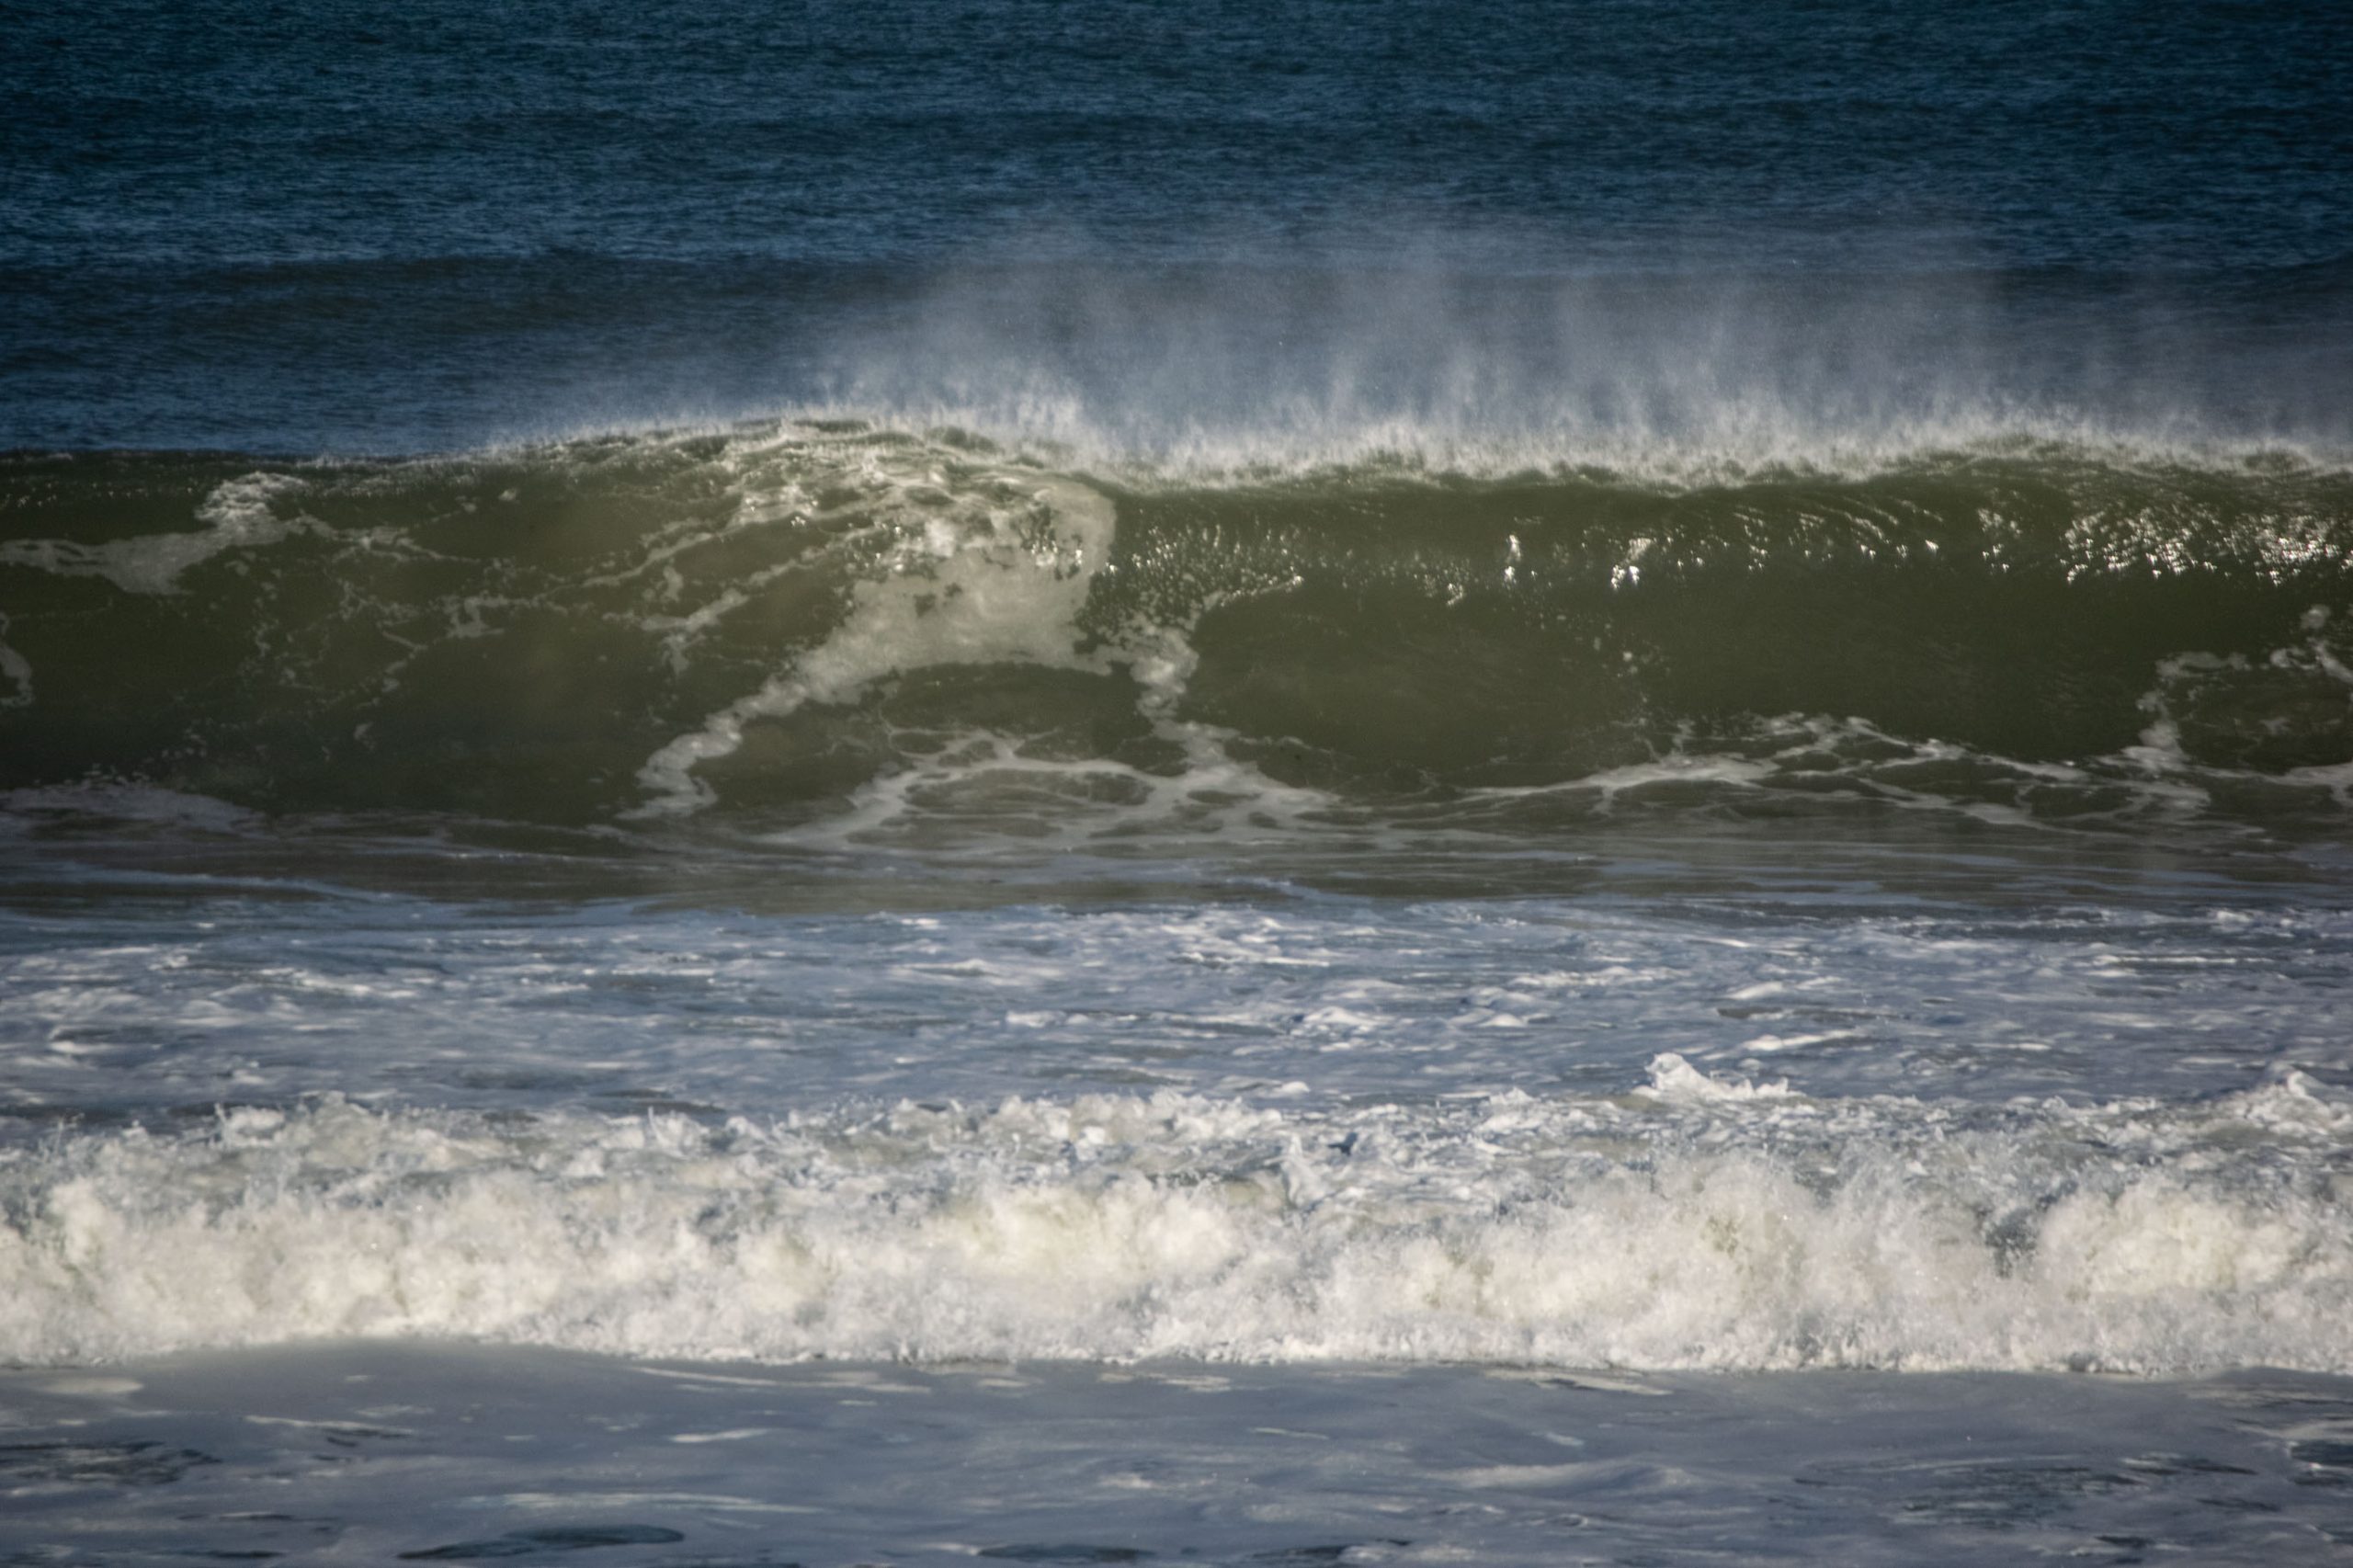 Large waves as Jersey Shore beaches impacted by Hurricane Teddy, Sept. 22, 2020. (Photo: Daniel Nee)